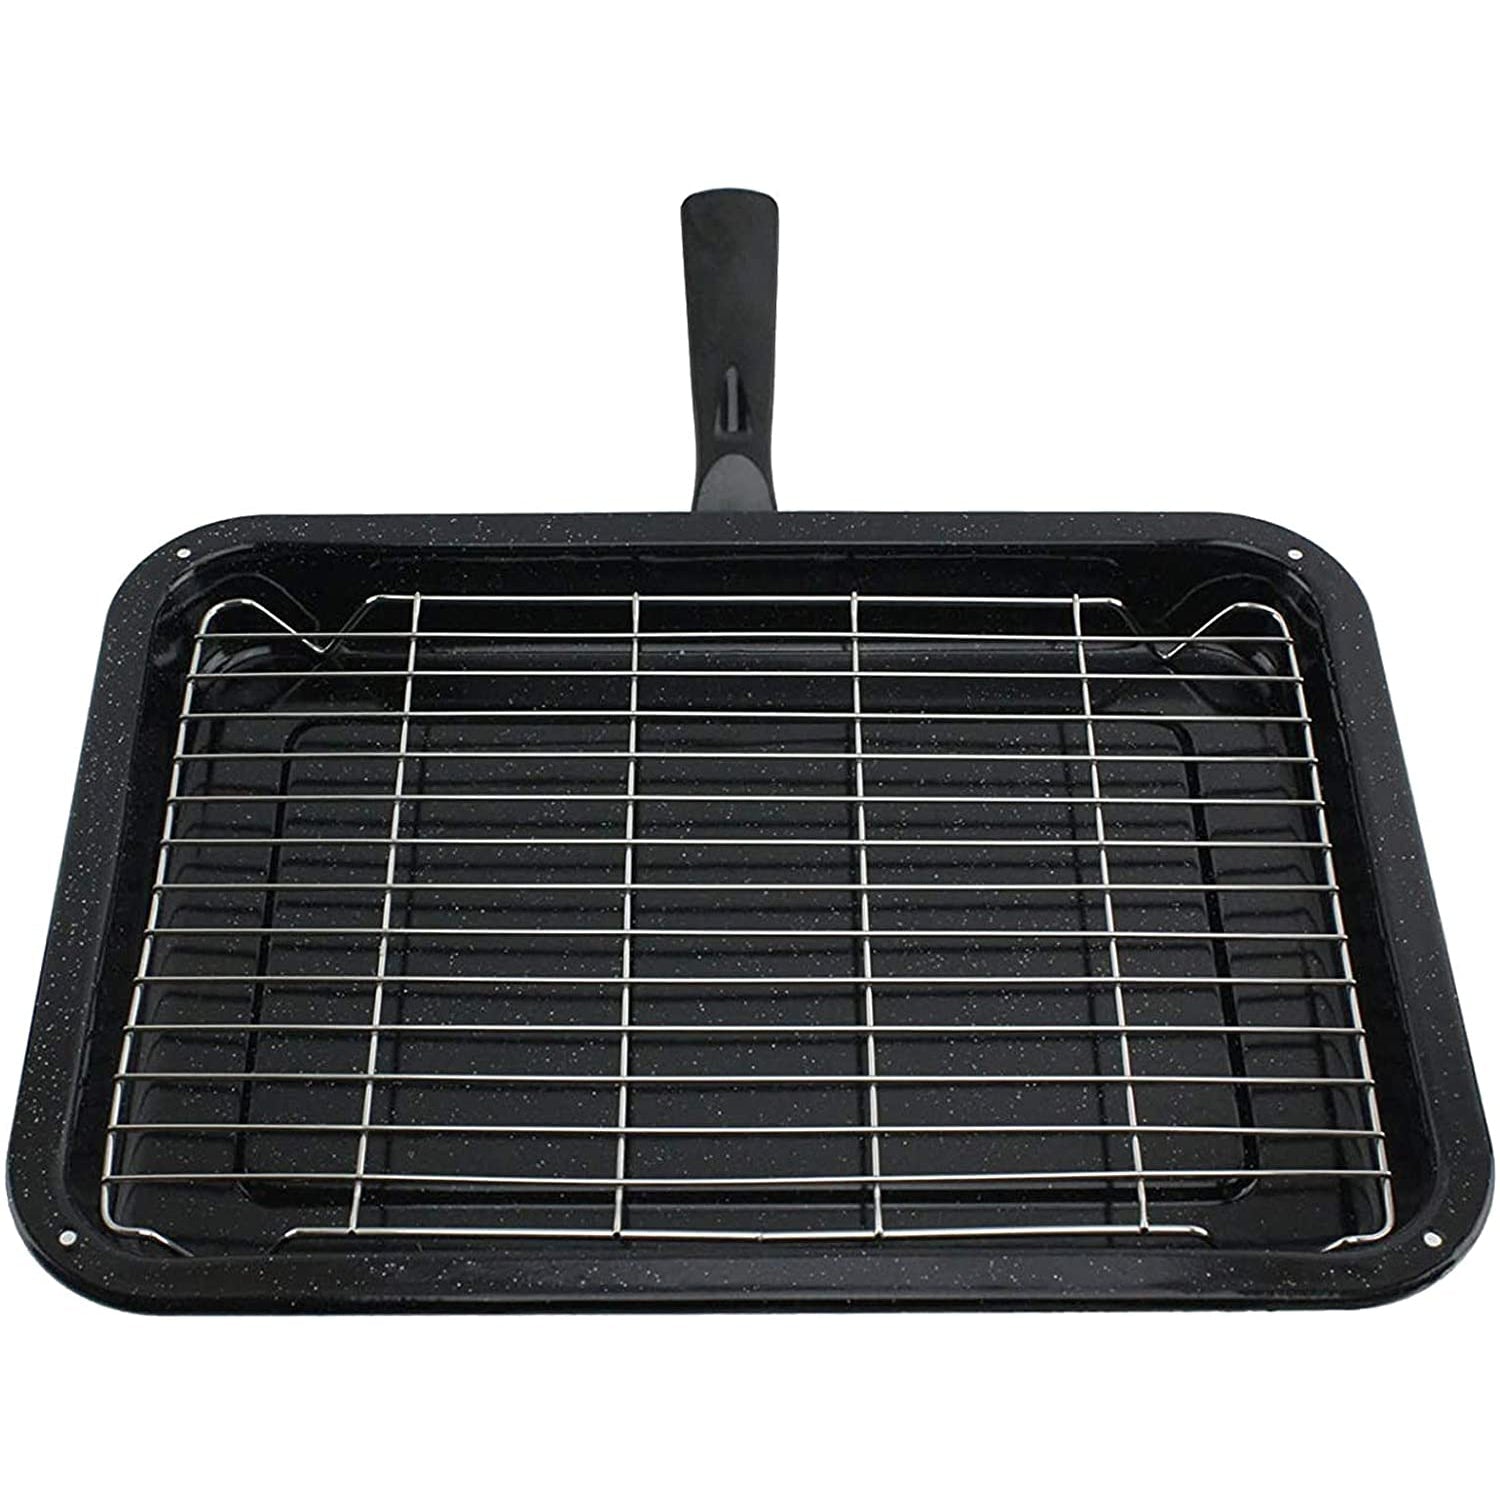 Small Grill Pan with Rack and Detachable Handle + Adjustable Grill Shelf for WHIRLPOOL Oven Cooker